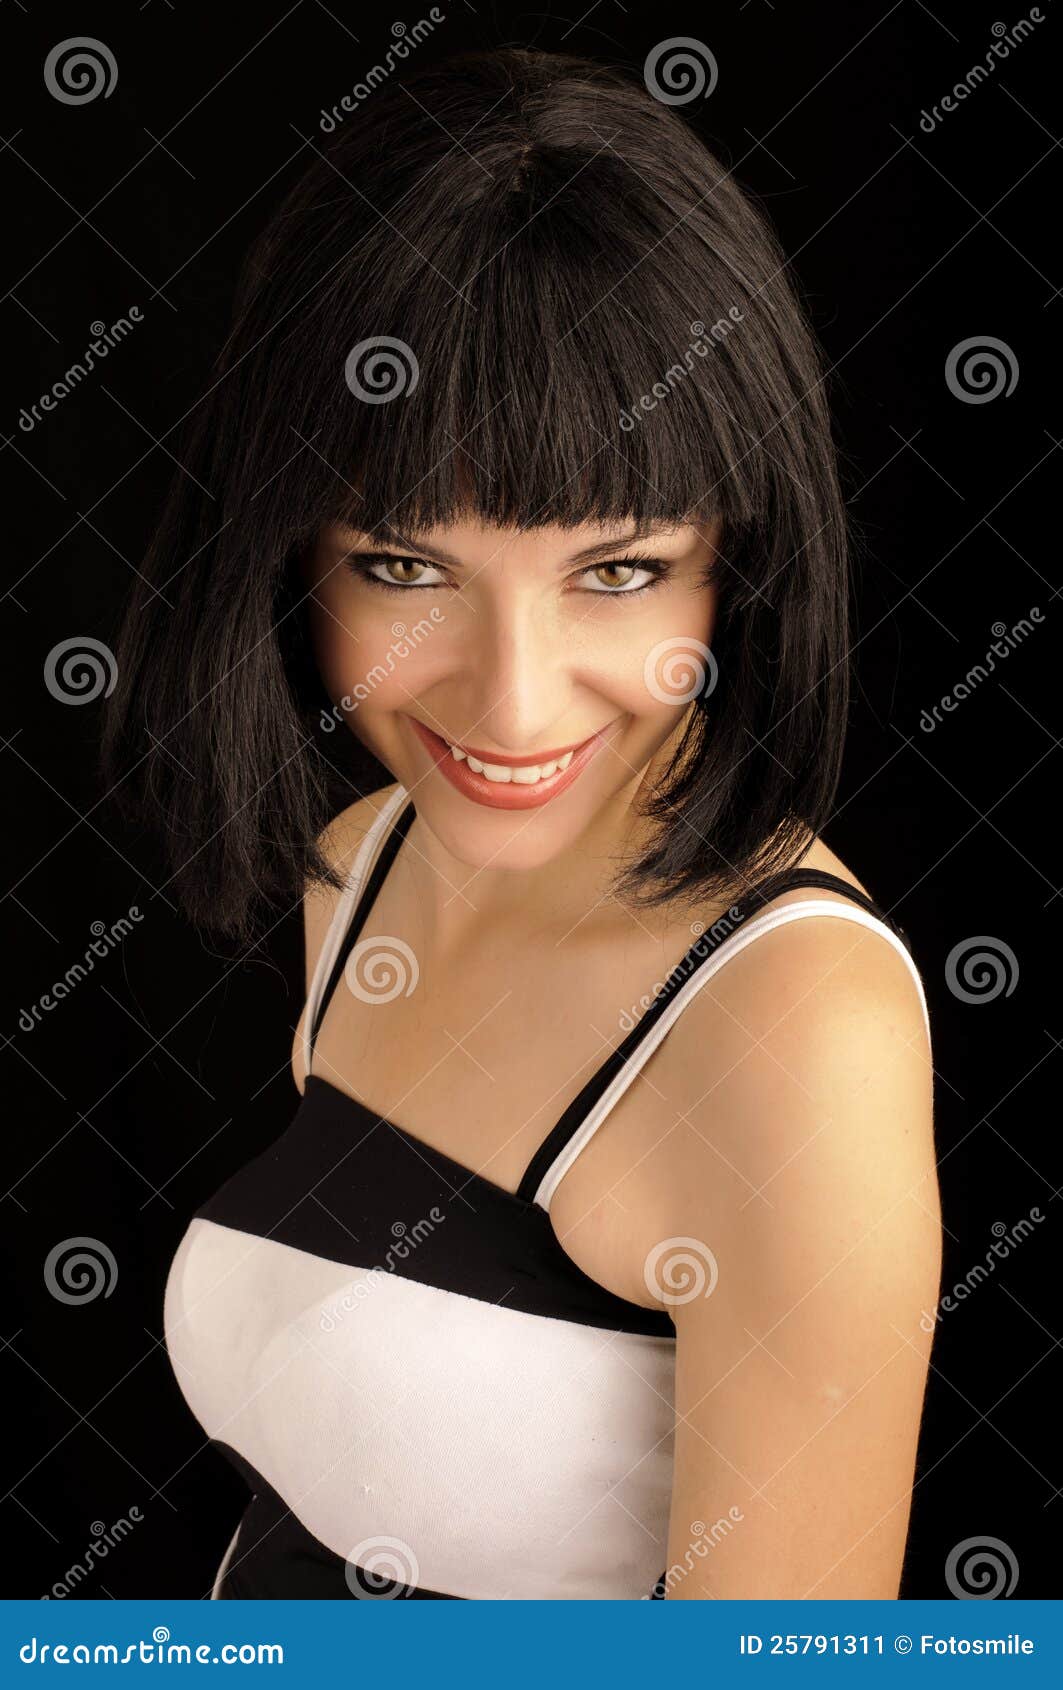 Beautiful Young Woman With Bob Hairstyle Stock Image - Image: 25791311